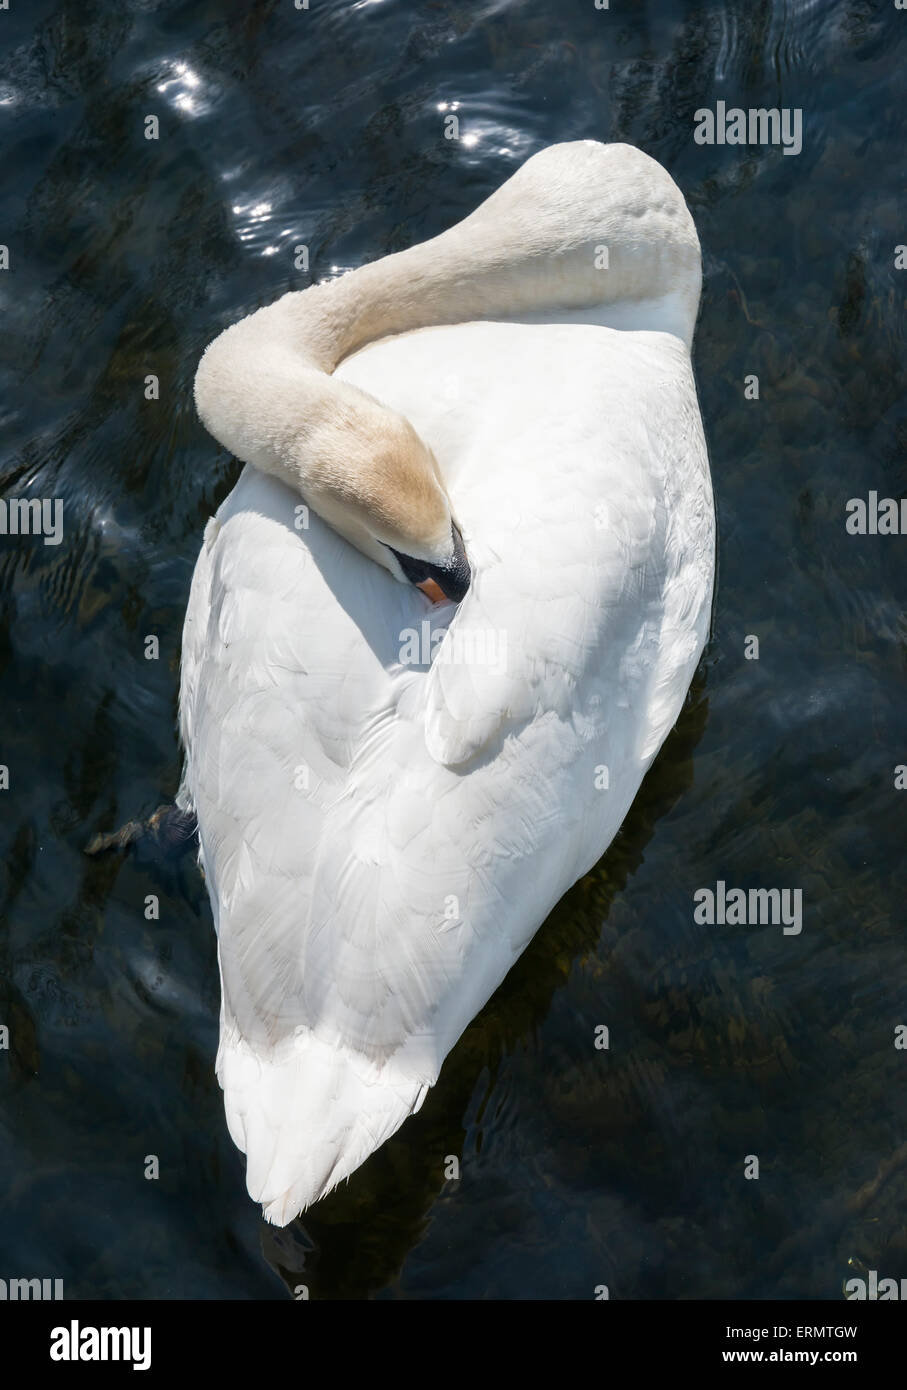 Photograph of a resting Mute Swan taken from an elevated position Stock Photo